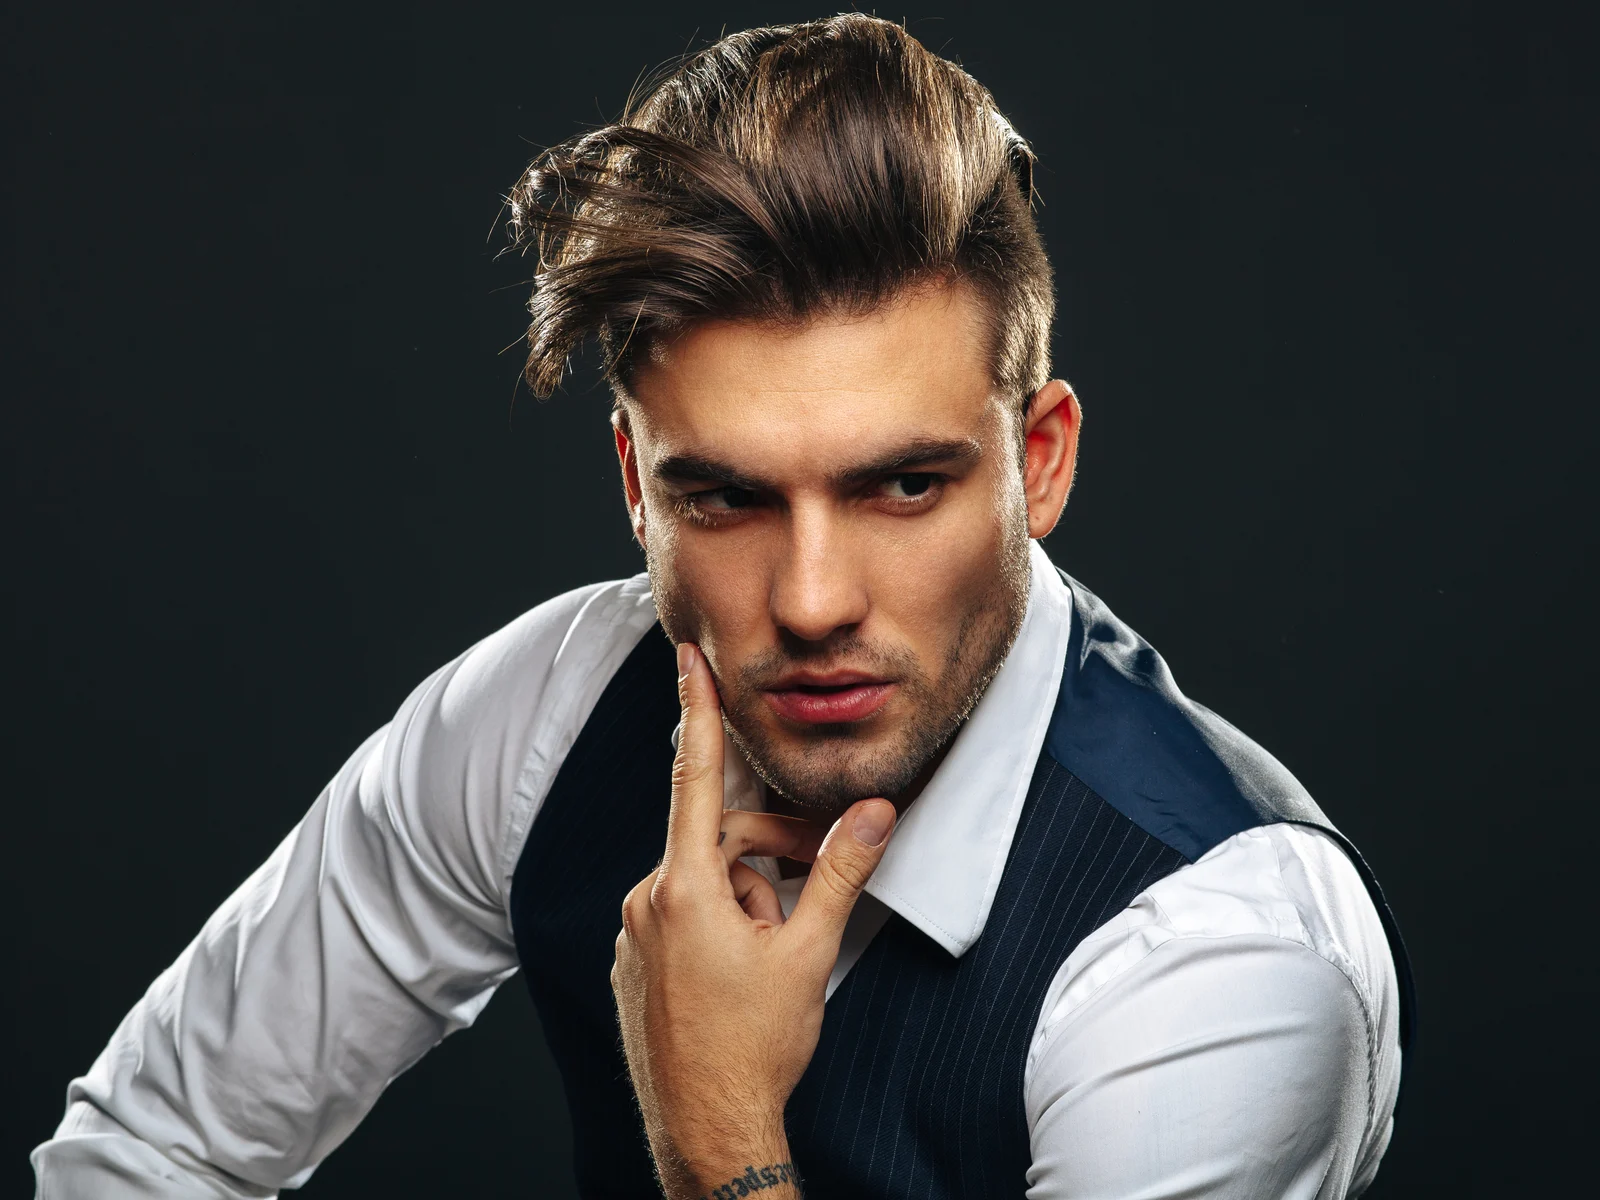 100 Best Men's Hairstyles and Haircuts To Look Super Hot (2023 Update) |  Professional hairstyles for men, Haircuts for men, Stylish haircuts